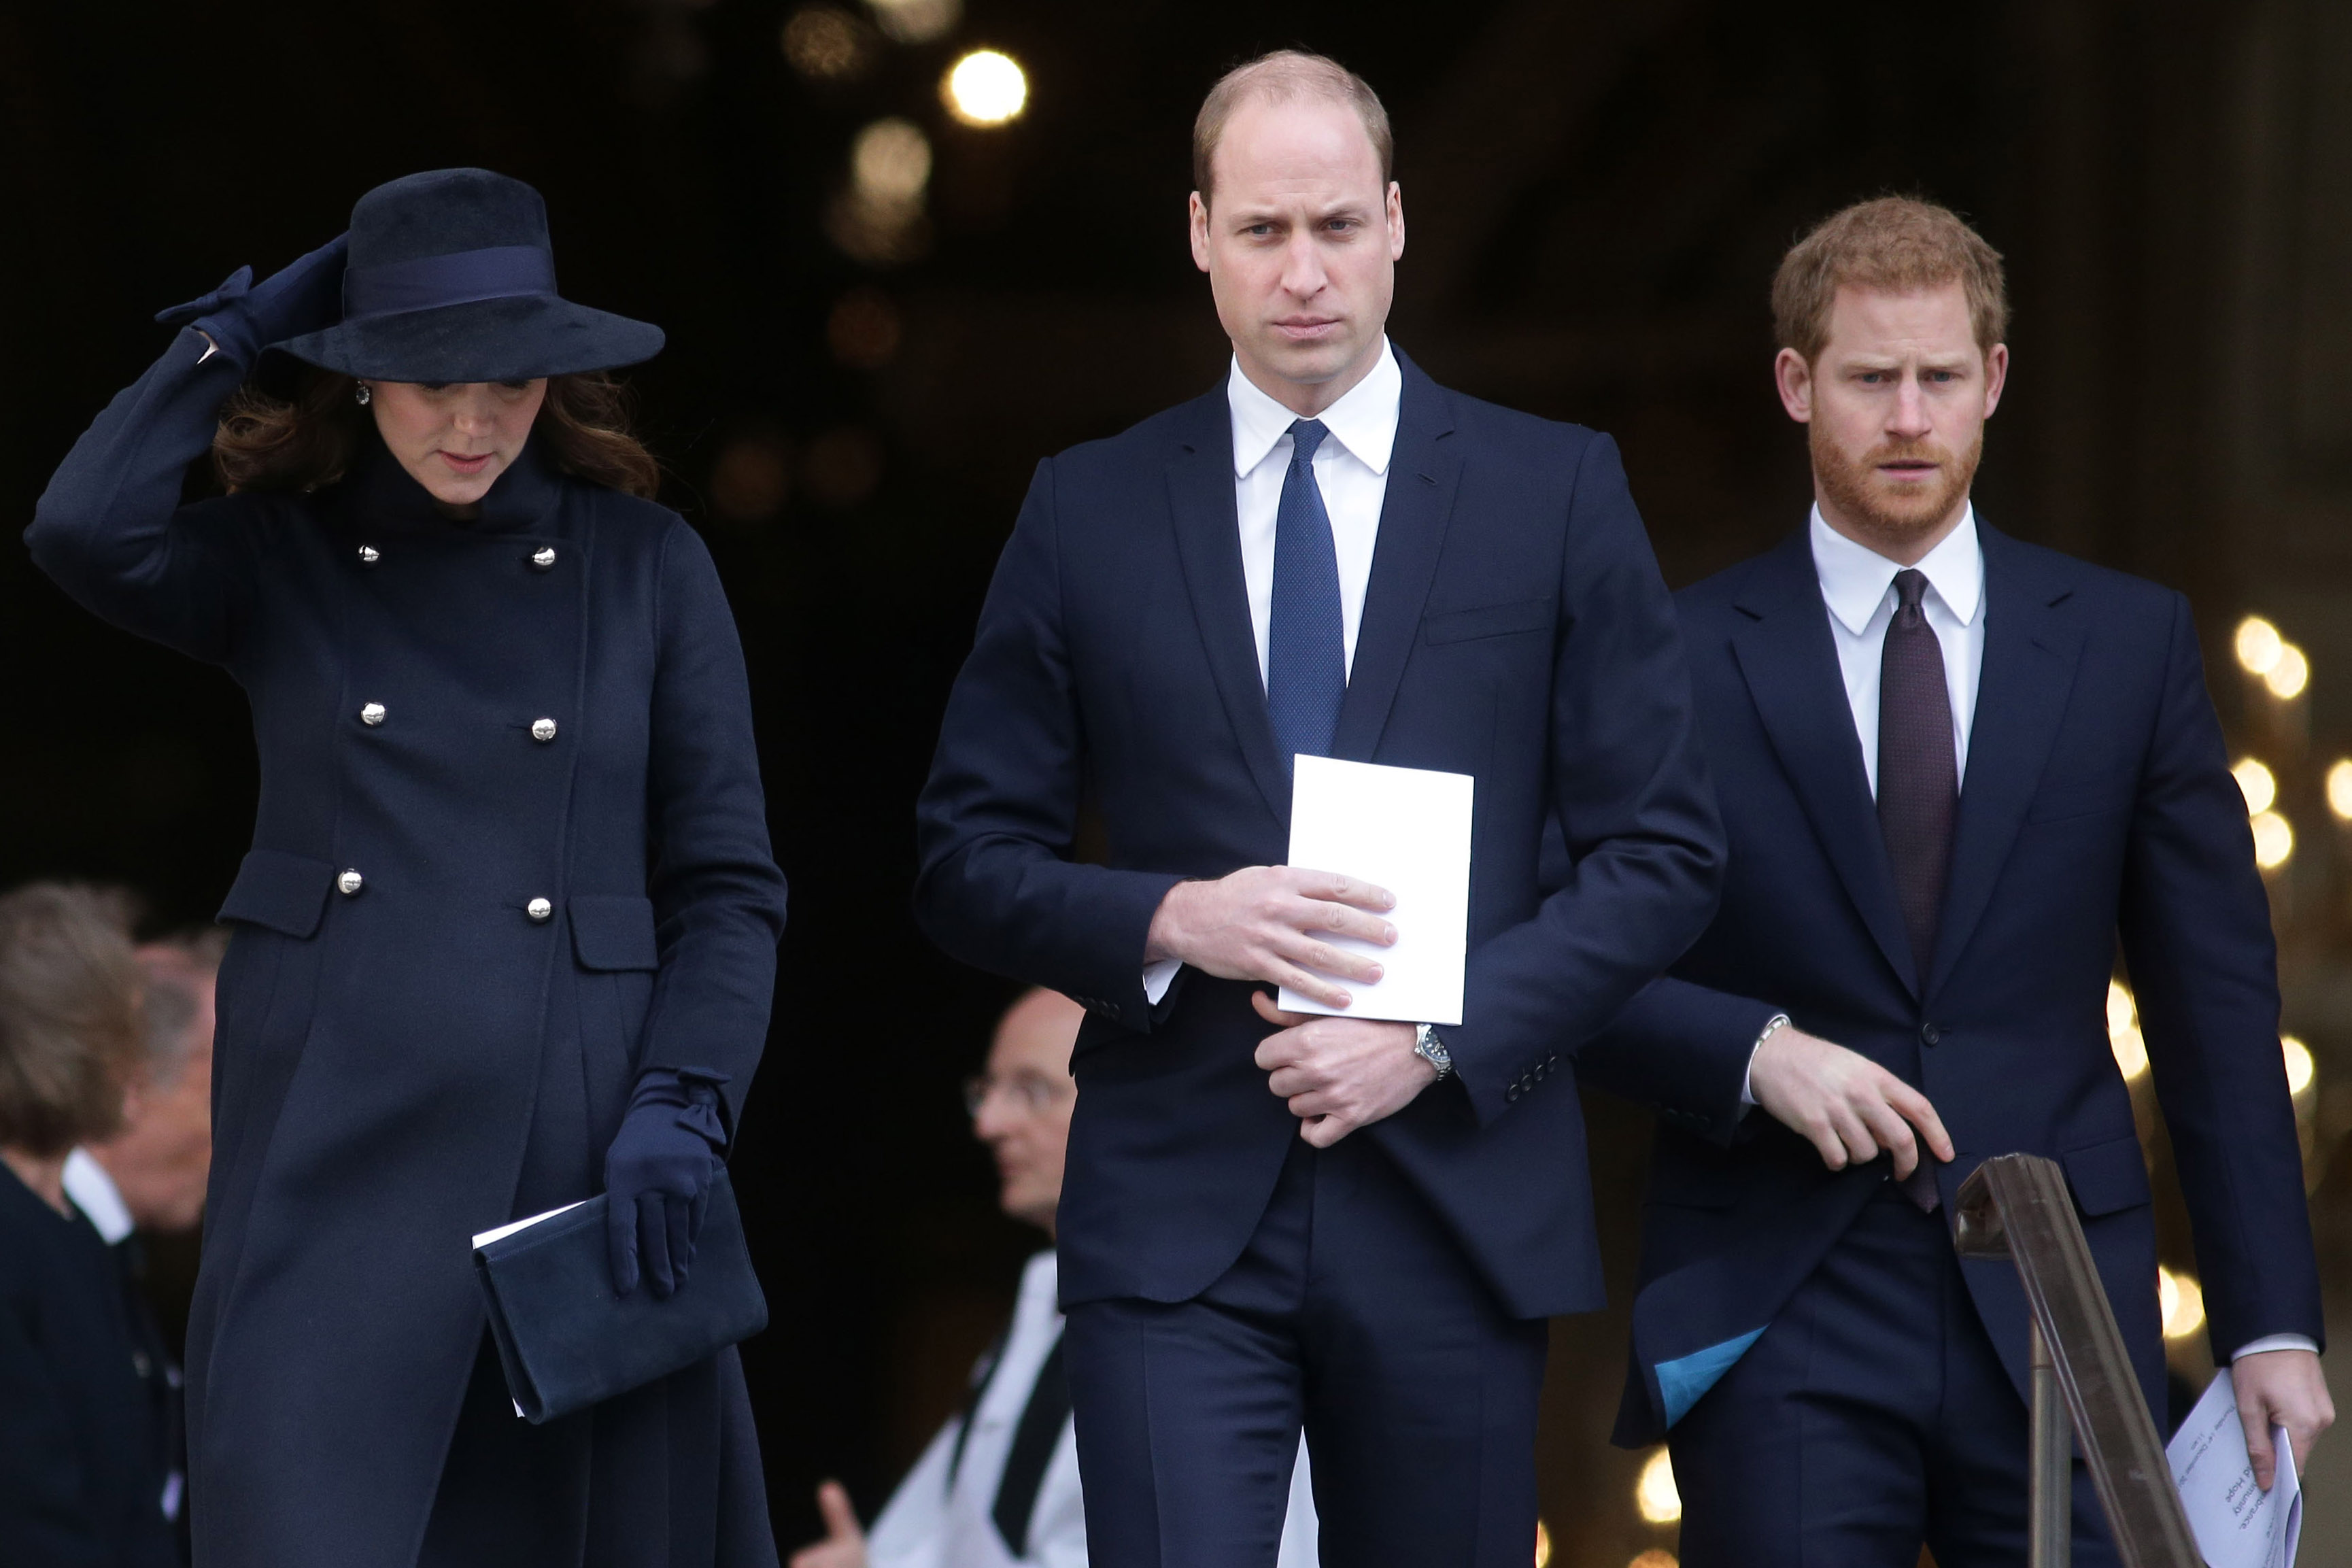 Catherine, Duchess of Cambridge, Prince William, Duke of Cambridge and Prince Harry after attending the Grenfell Tower National Memorial Service at St Paul's Cathedral on December 14, 2017 in London, England | Source: Getty Images